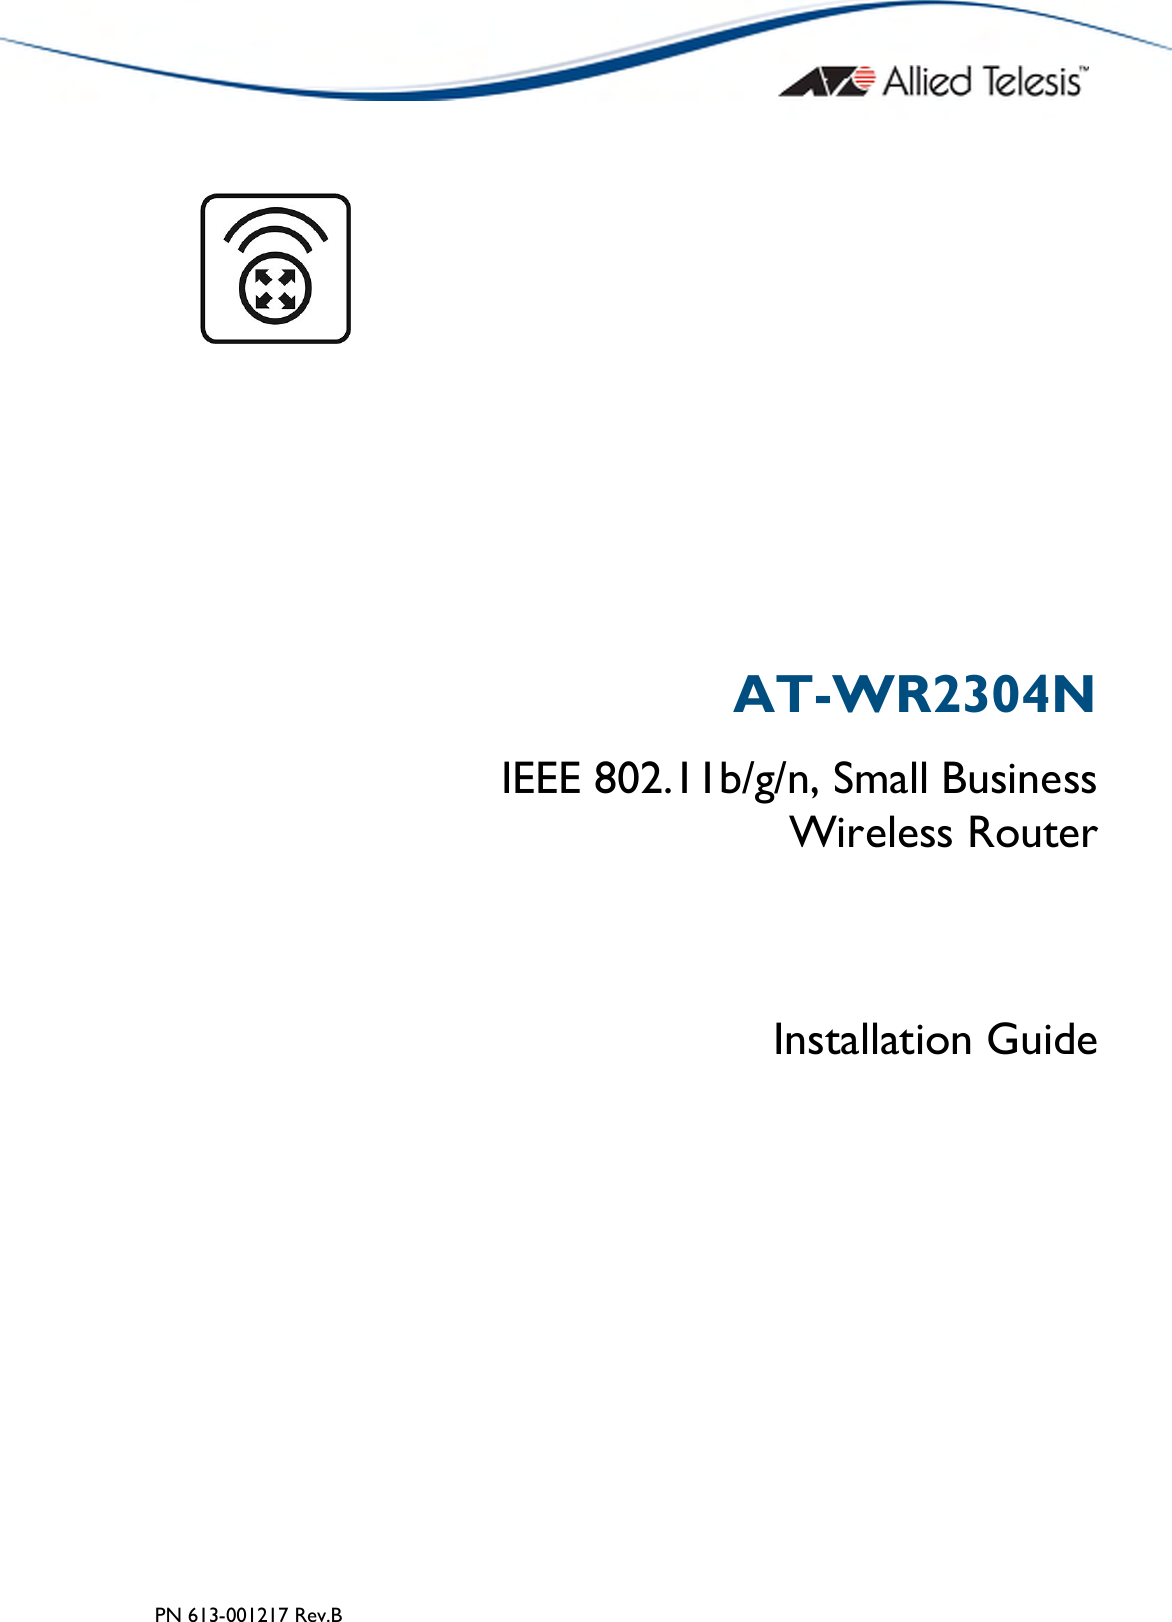  PN 613-001217 Rev.B    AT-WR2304N IEEE 802.11b/g/n, Small Business Wireless Router  Installation Guide  